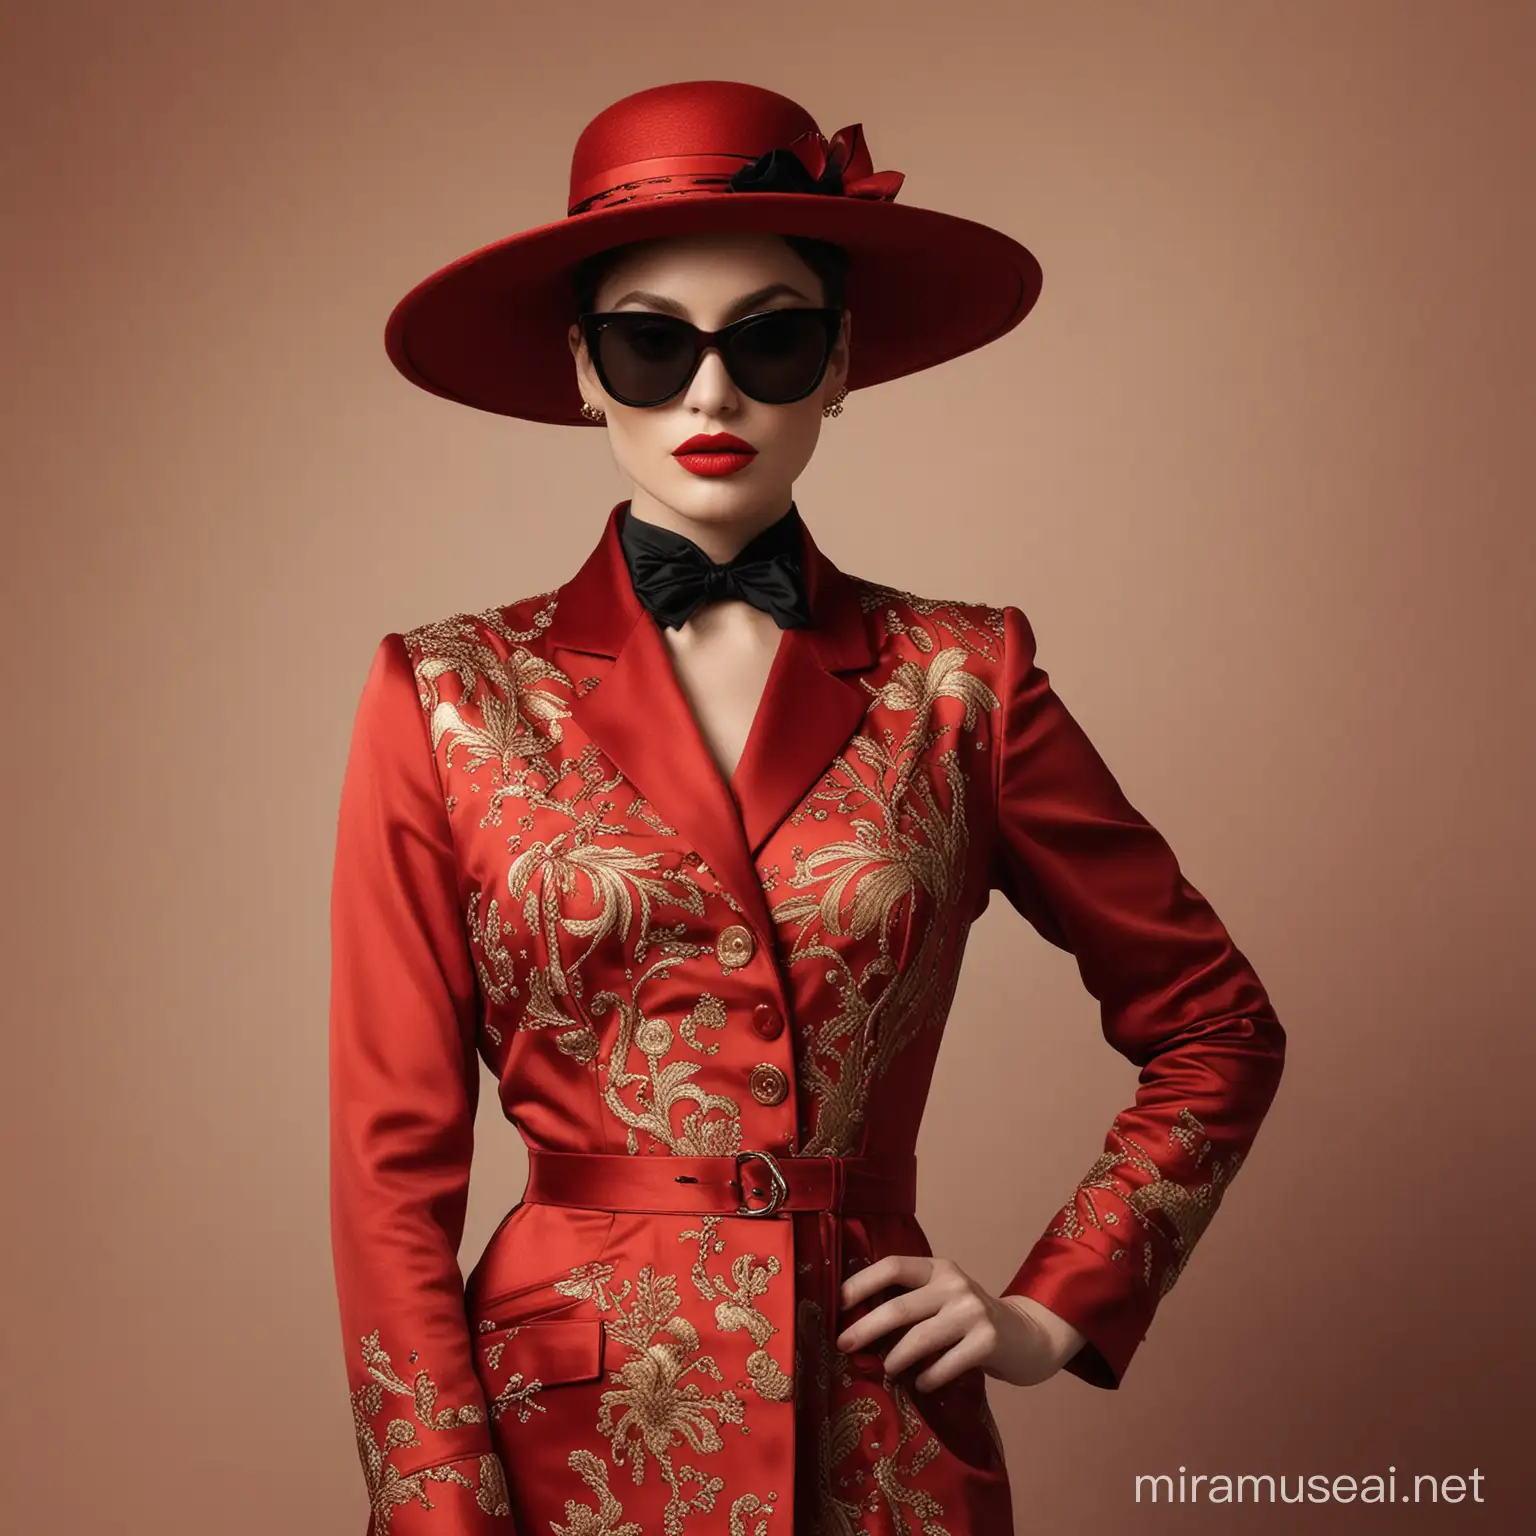 35 years old woman , Venetian carnival figure dressed in a designer night dress from either Dior, Gucci, or Armani, topped with an elegant hat, adorned with sunglasses, hands casually placed in pockets, color palette rich in red, golden, and black hues, captured in a Vogue-style fashion, artistic elements echoing the styles of Eiko Ojala and Tracie Grimwood blended with Alberto Seveso's festive touch, fusion of watercolor, soft pastel, and oil accents on a